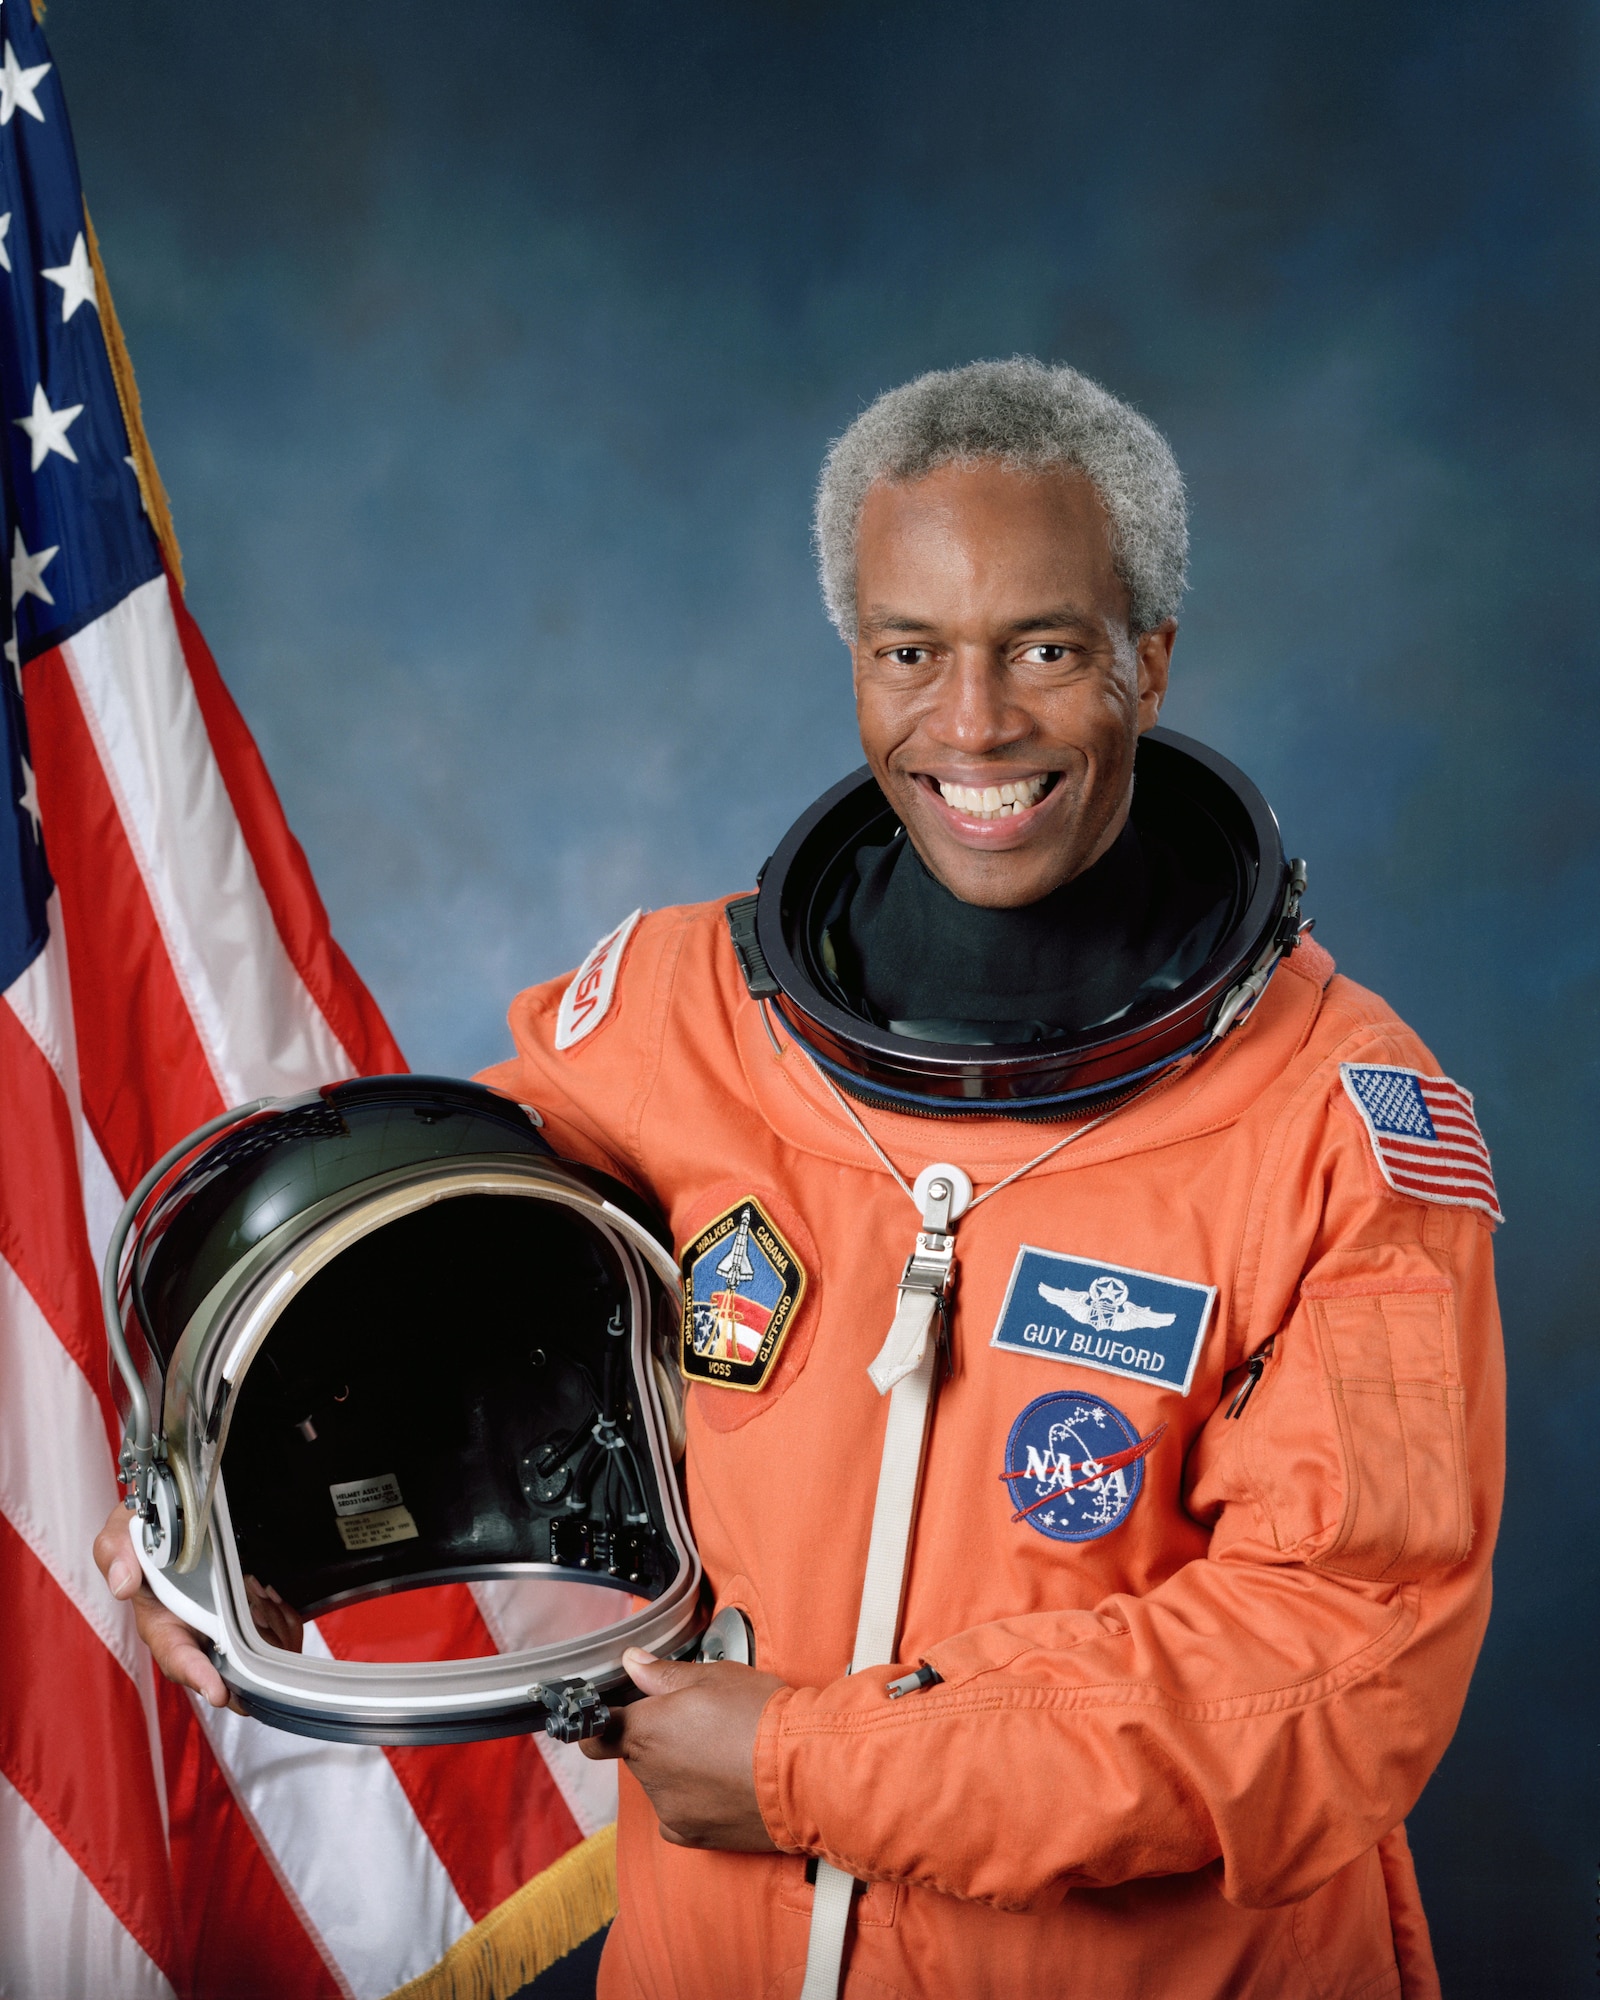 Astronaut and retired USAF Col. Guion S. Bluford Jr. poses for a bio photo in his spacesuit.